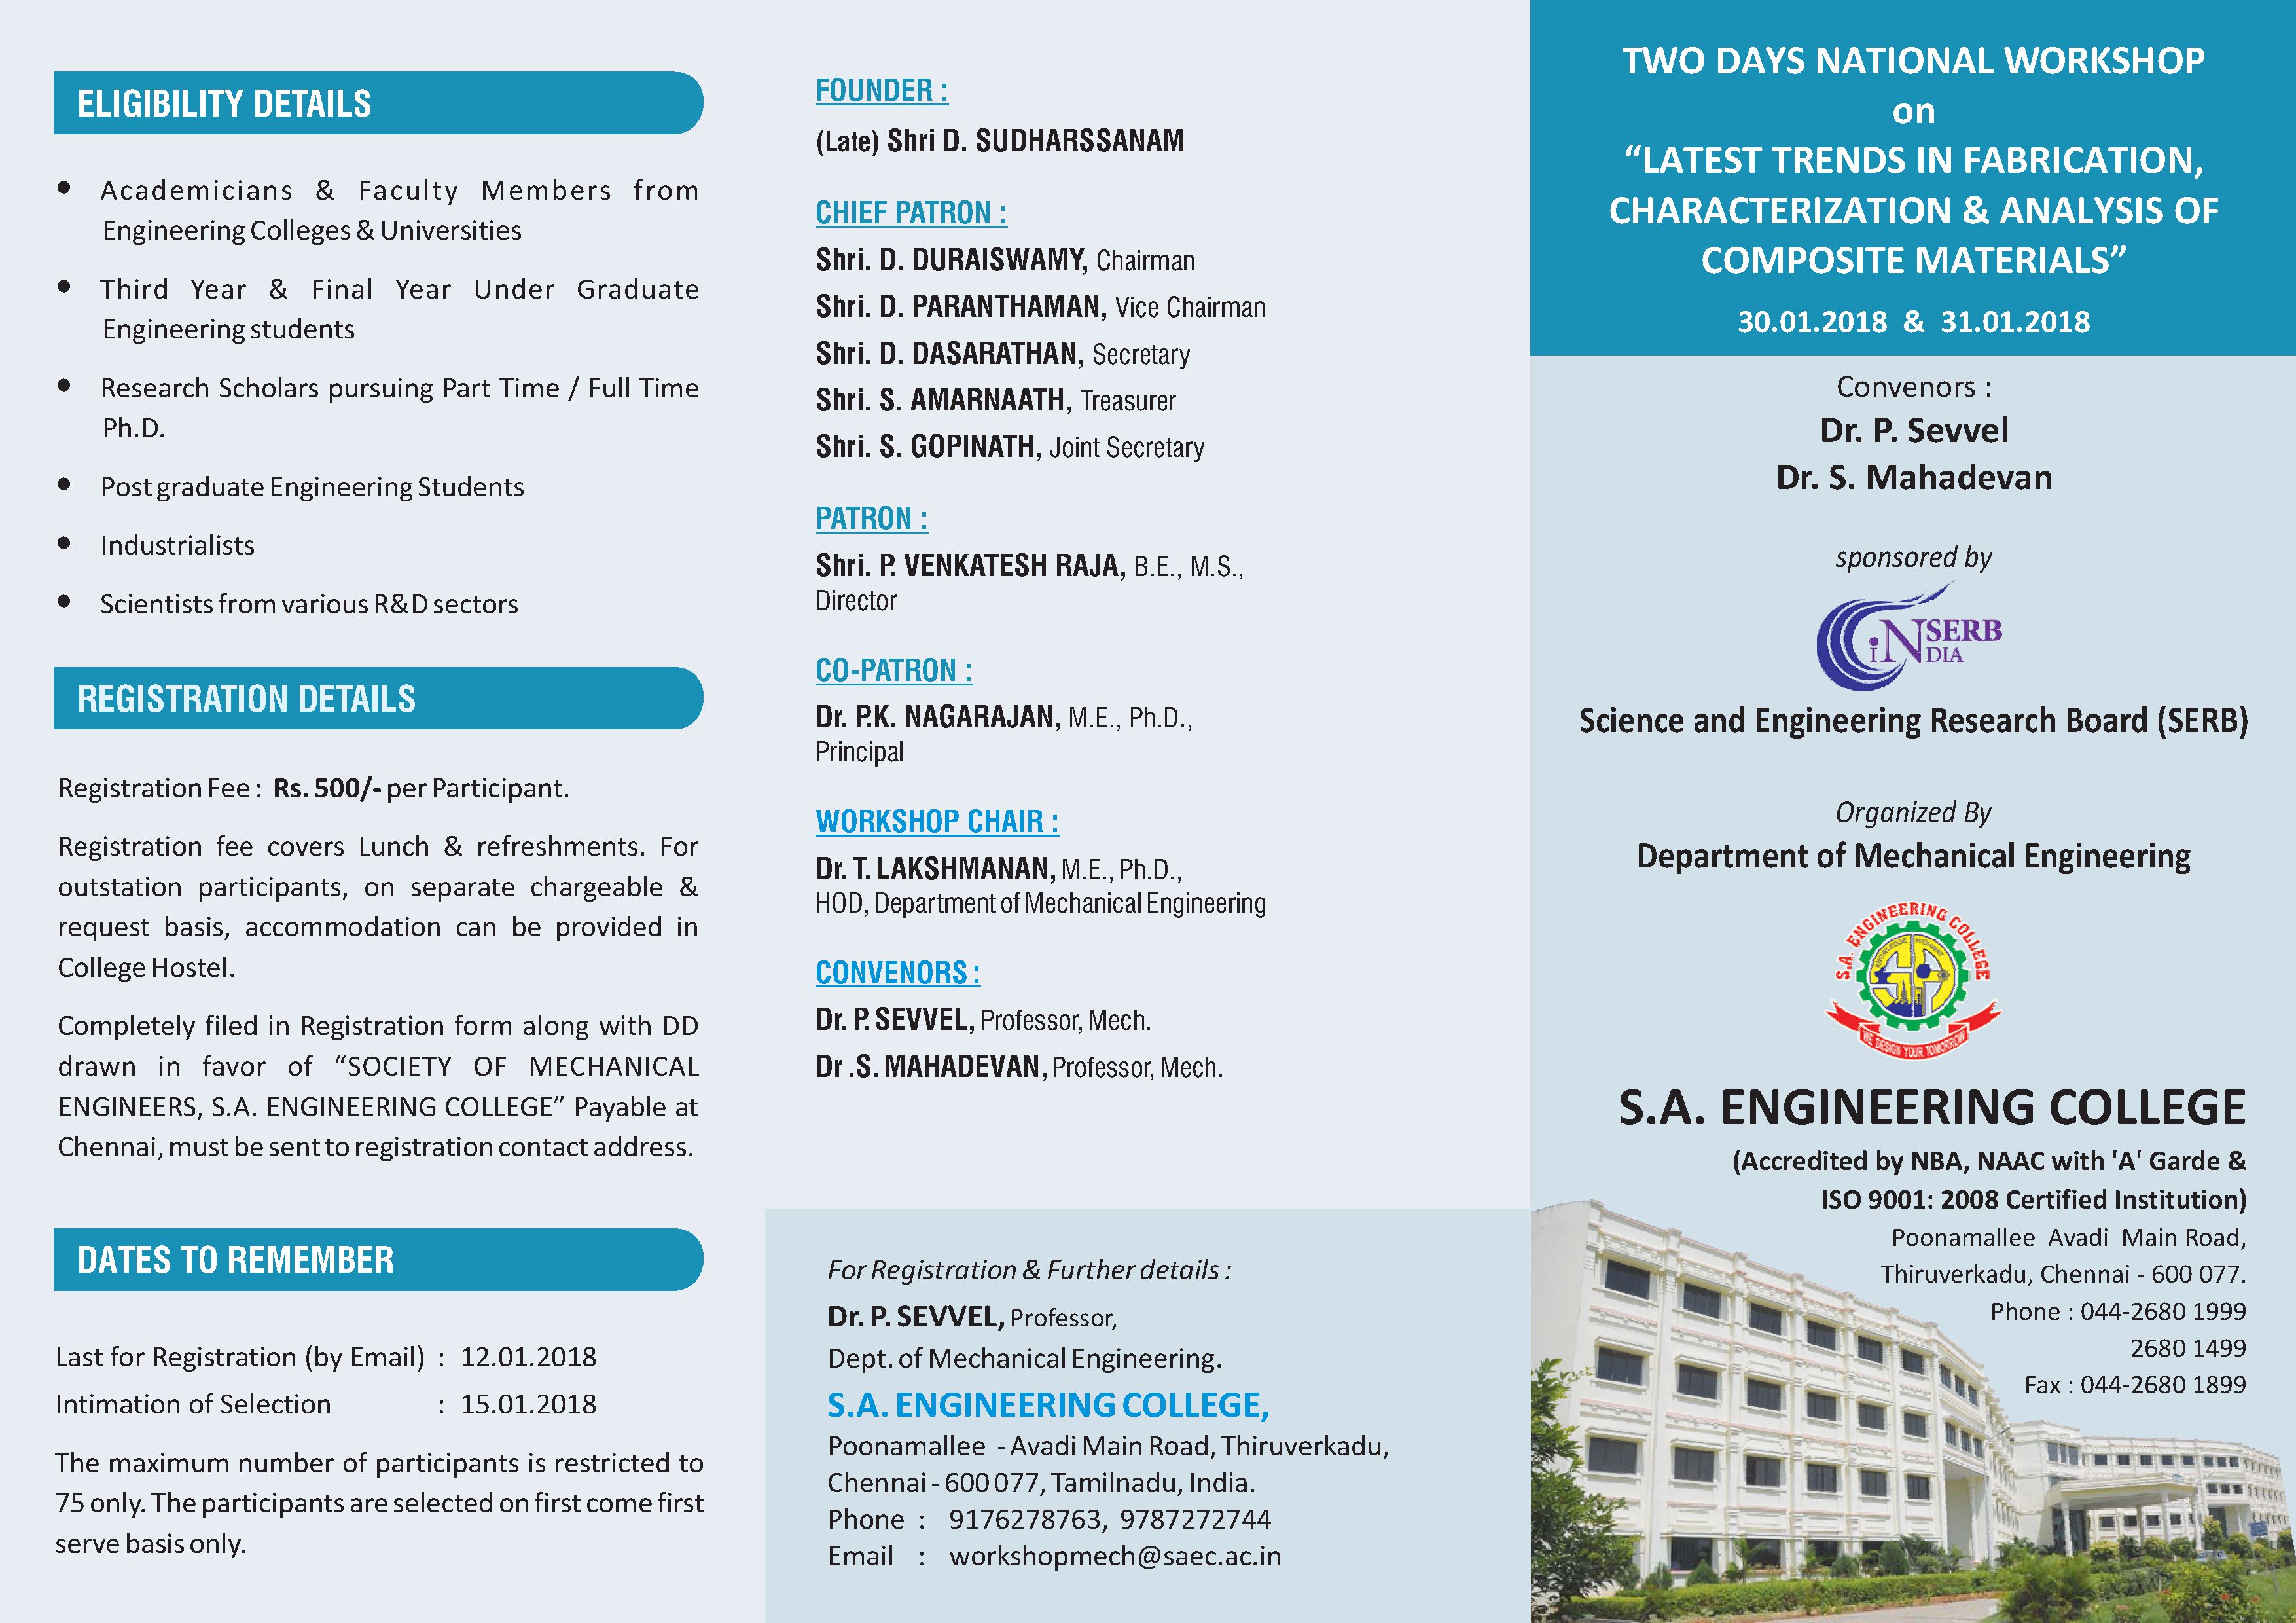 Two Days National Workshop on Latest trends in Fabrication, Characterization and Analysis of Composite Materials